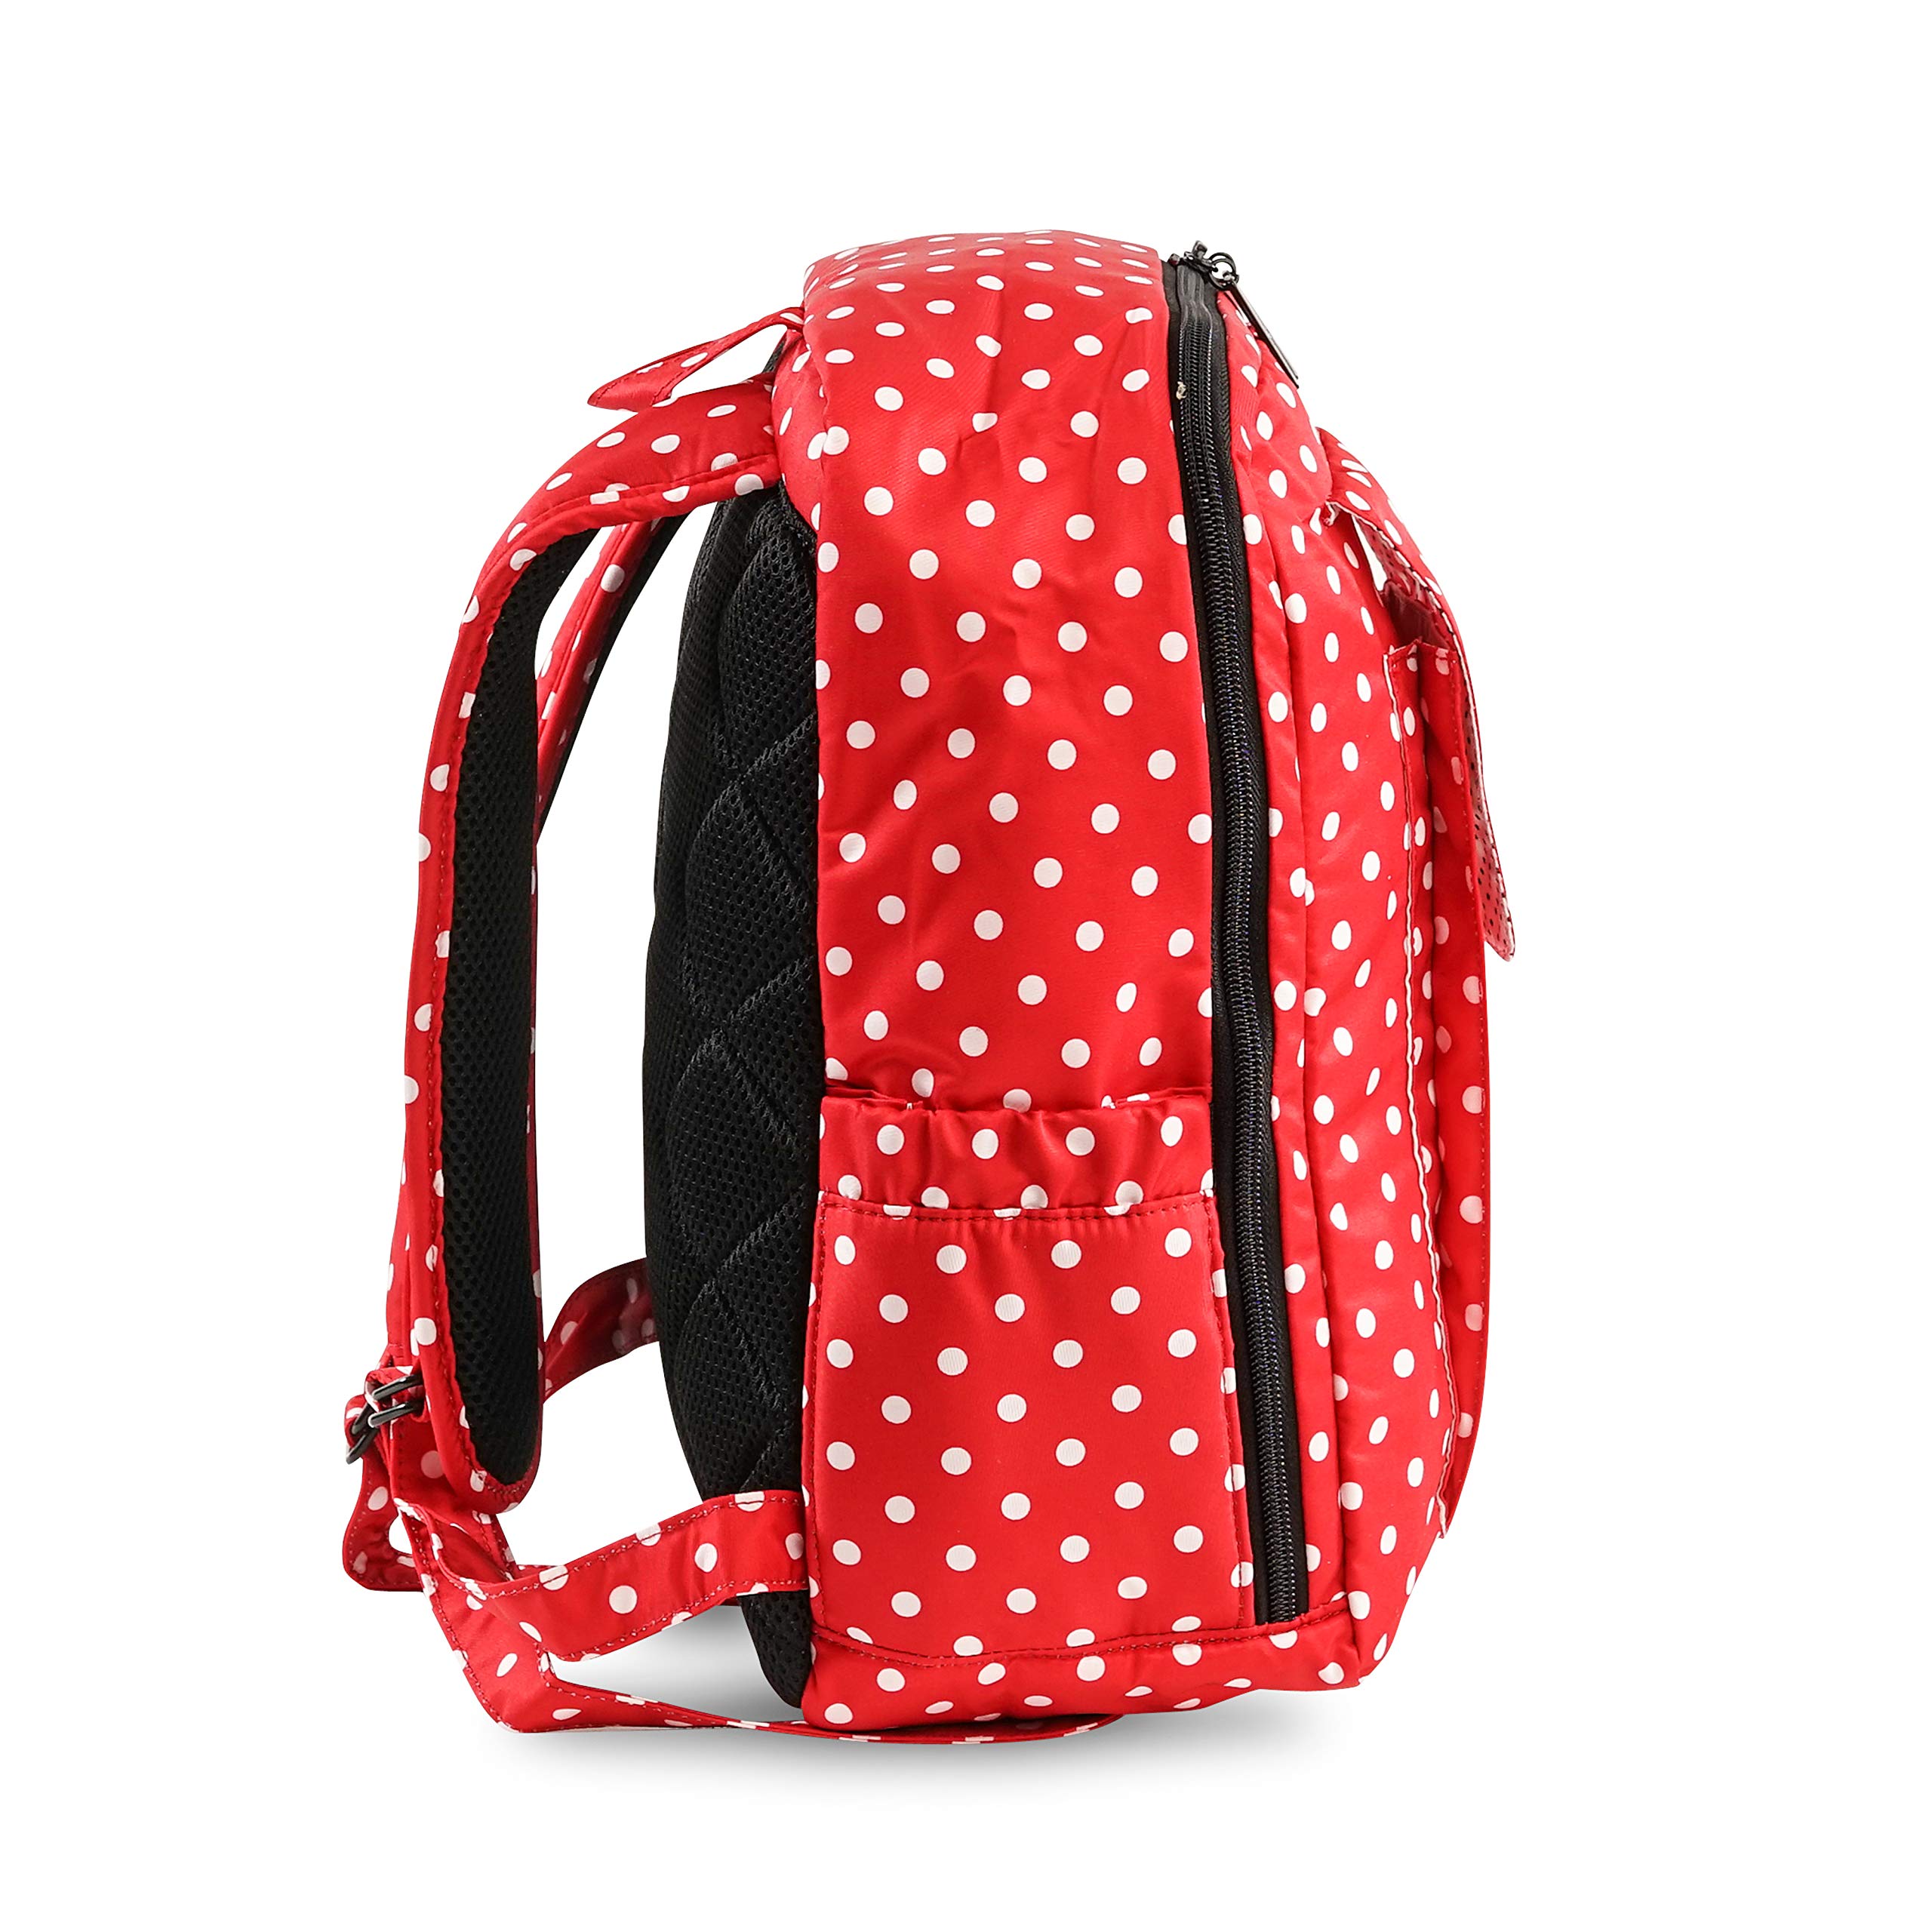 JuJuBe MiniBe Small Backpack, Onyx Collection - Black Ruby - Red/White Polka Dots